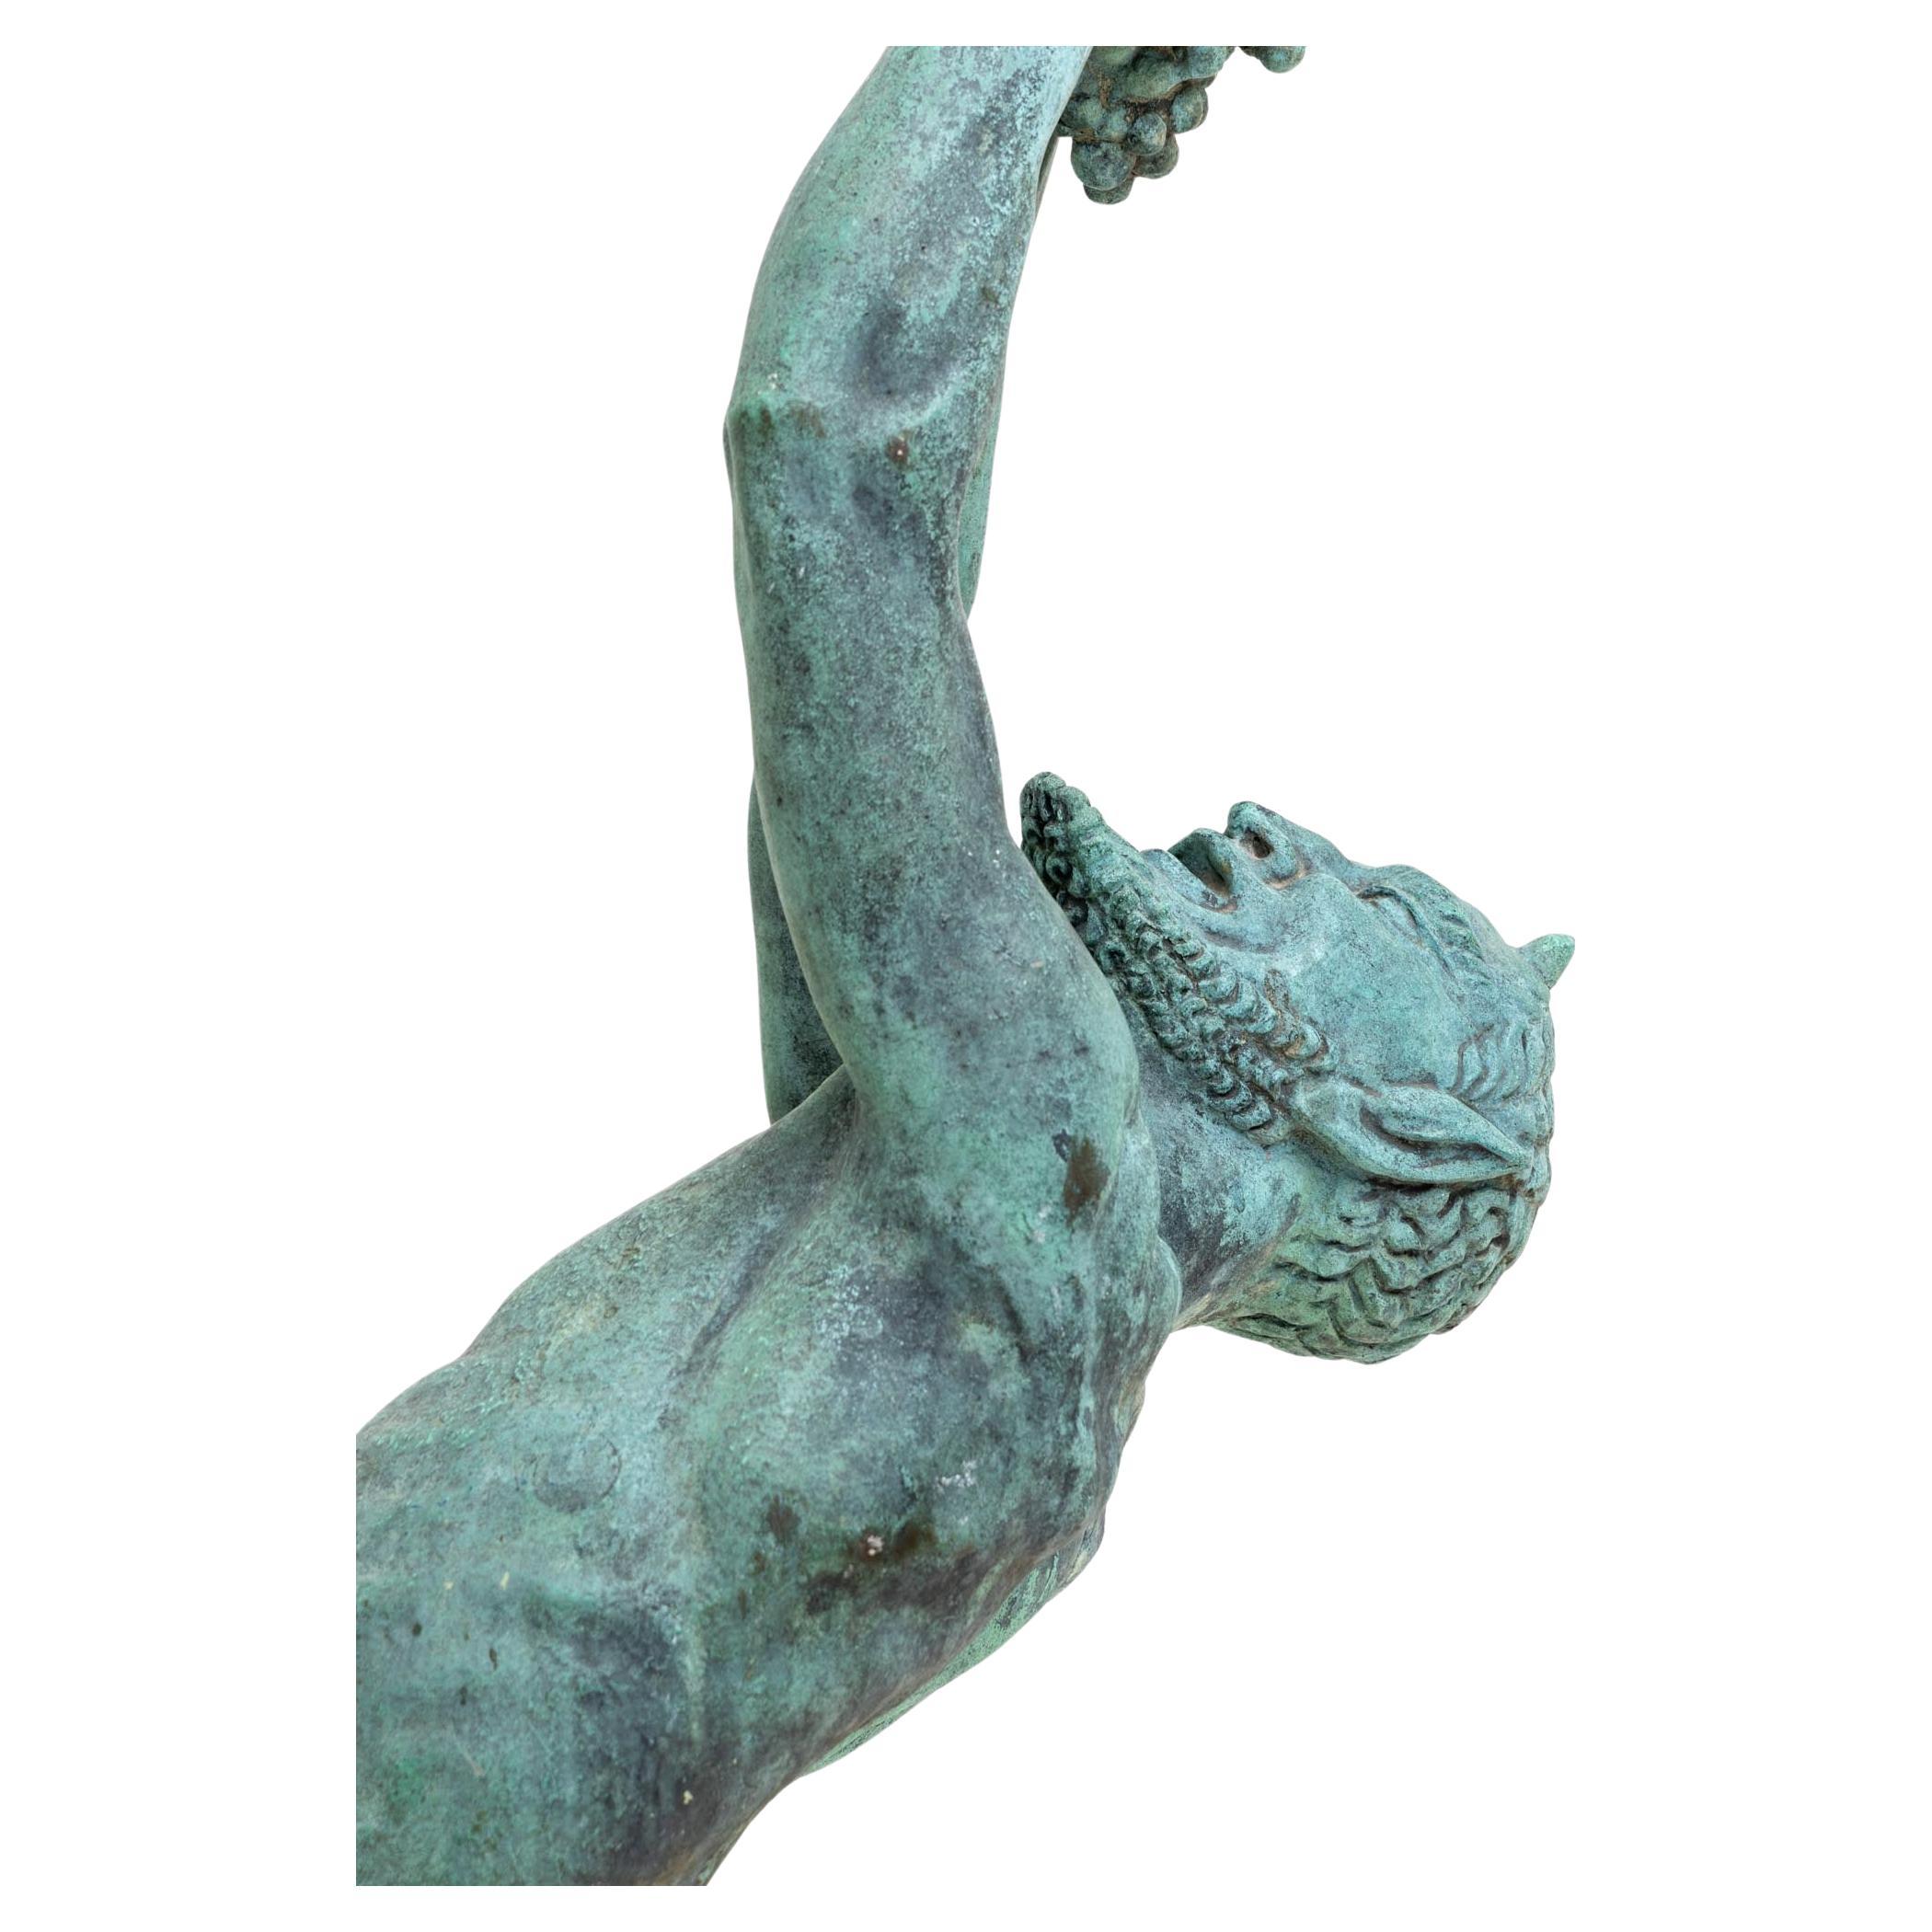 Large patinated copper sculpture of a naked dancing satyr in dynamic posture balancing on a small landscape base. He holds a vine over his face with both outstretched fists and bends his upper body far back. Signed May Mond 1928 on the base.